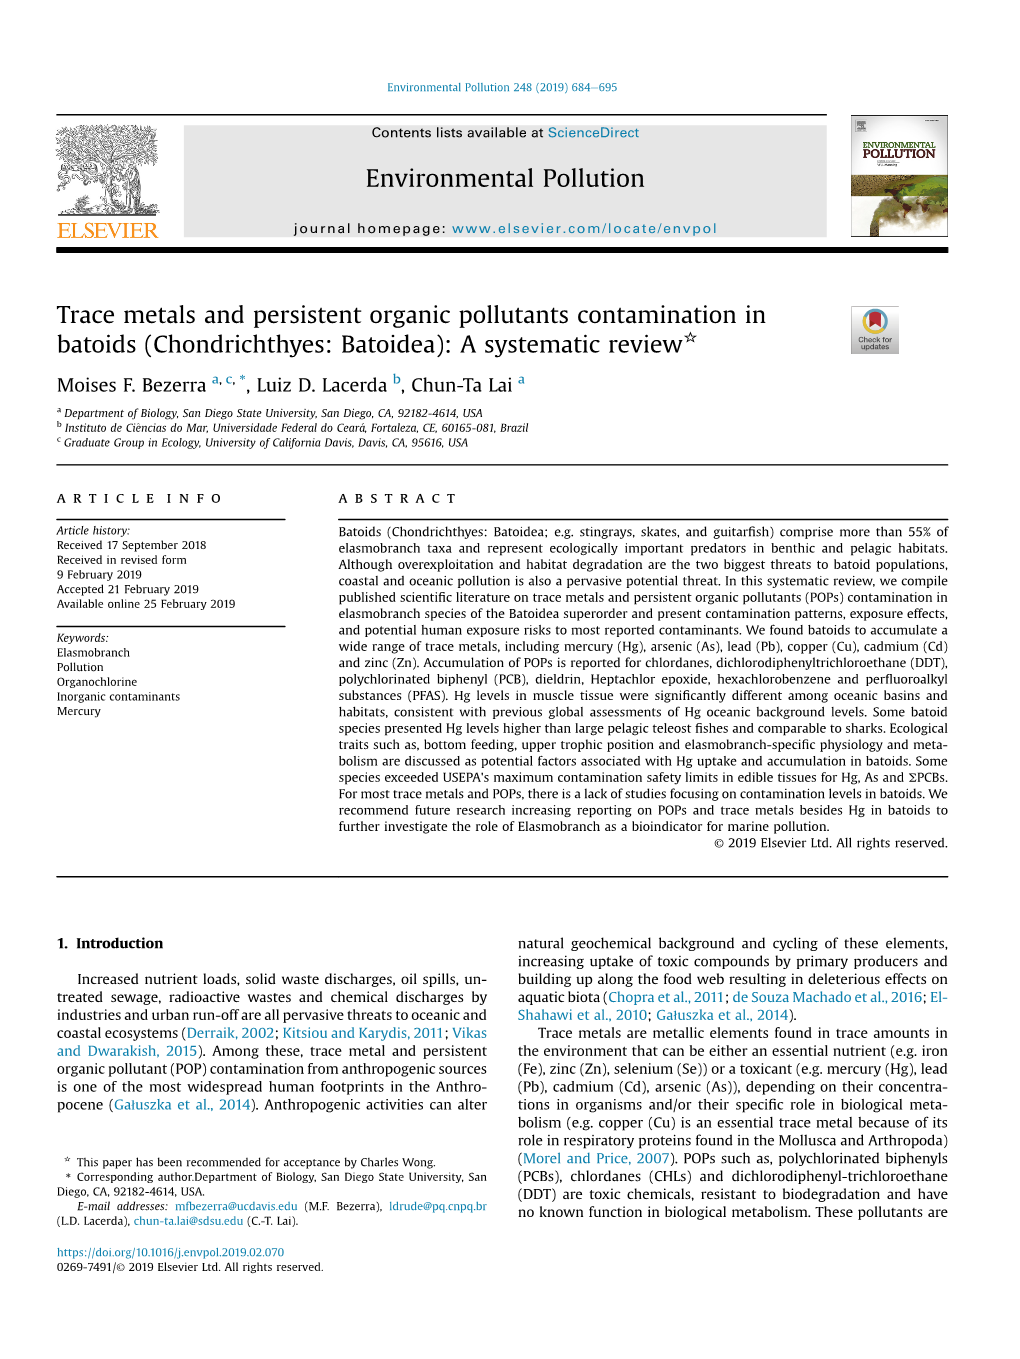 Trace Metals and Persistent Organic Pollutants Contamination in Batoids (Chondrichthyes: Batoidea): a Systematic Review*